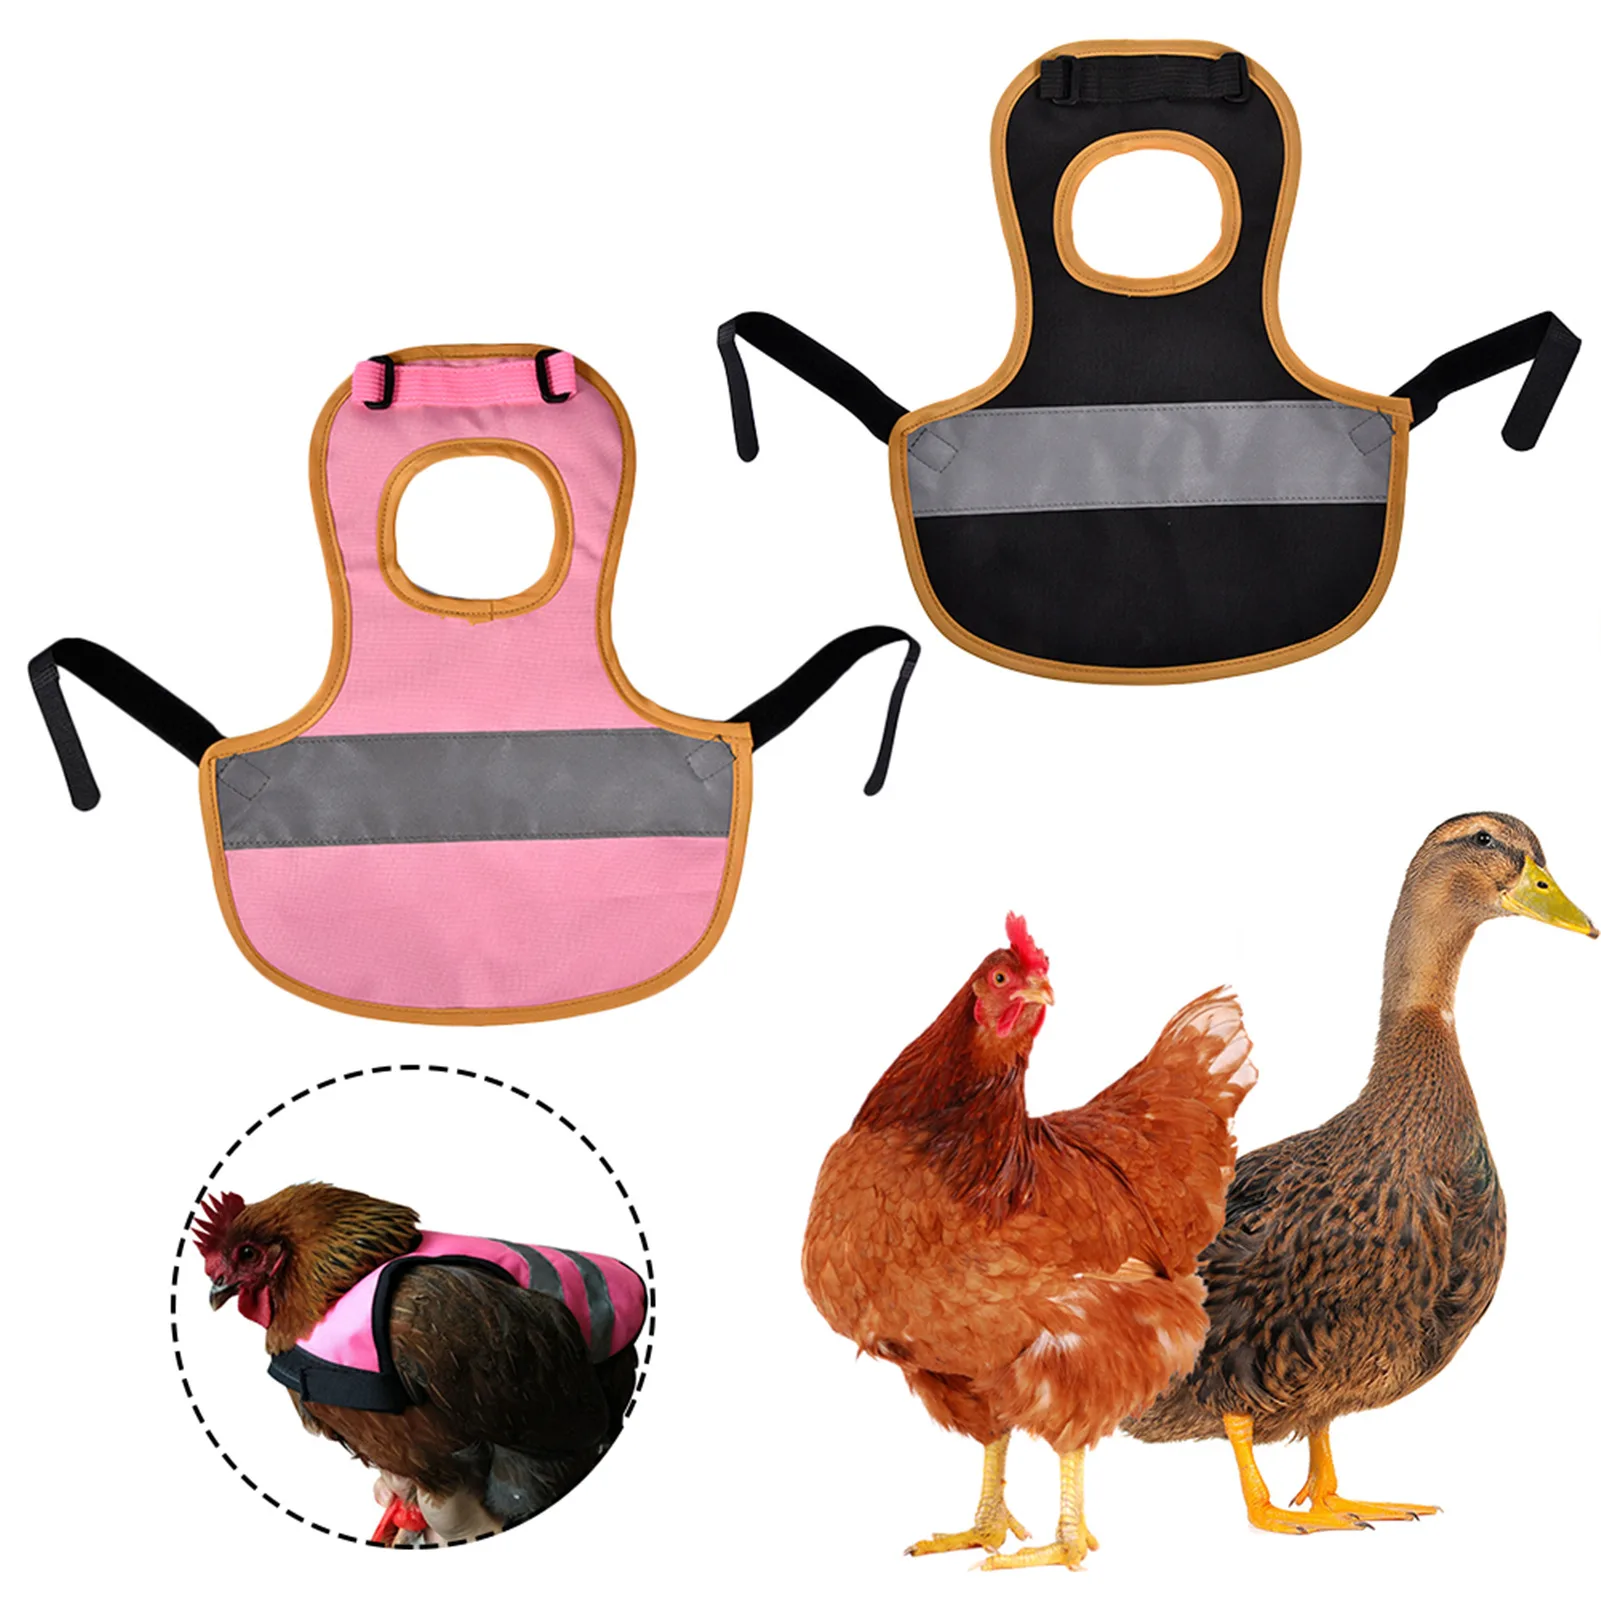 Chicken Saddle for Hens Poultry Apron with Elastic Strap Chicken Protection Suit for Small Medium Large Hen Ducks Black/Pink